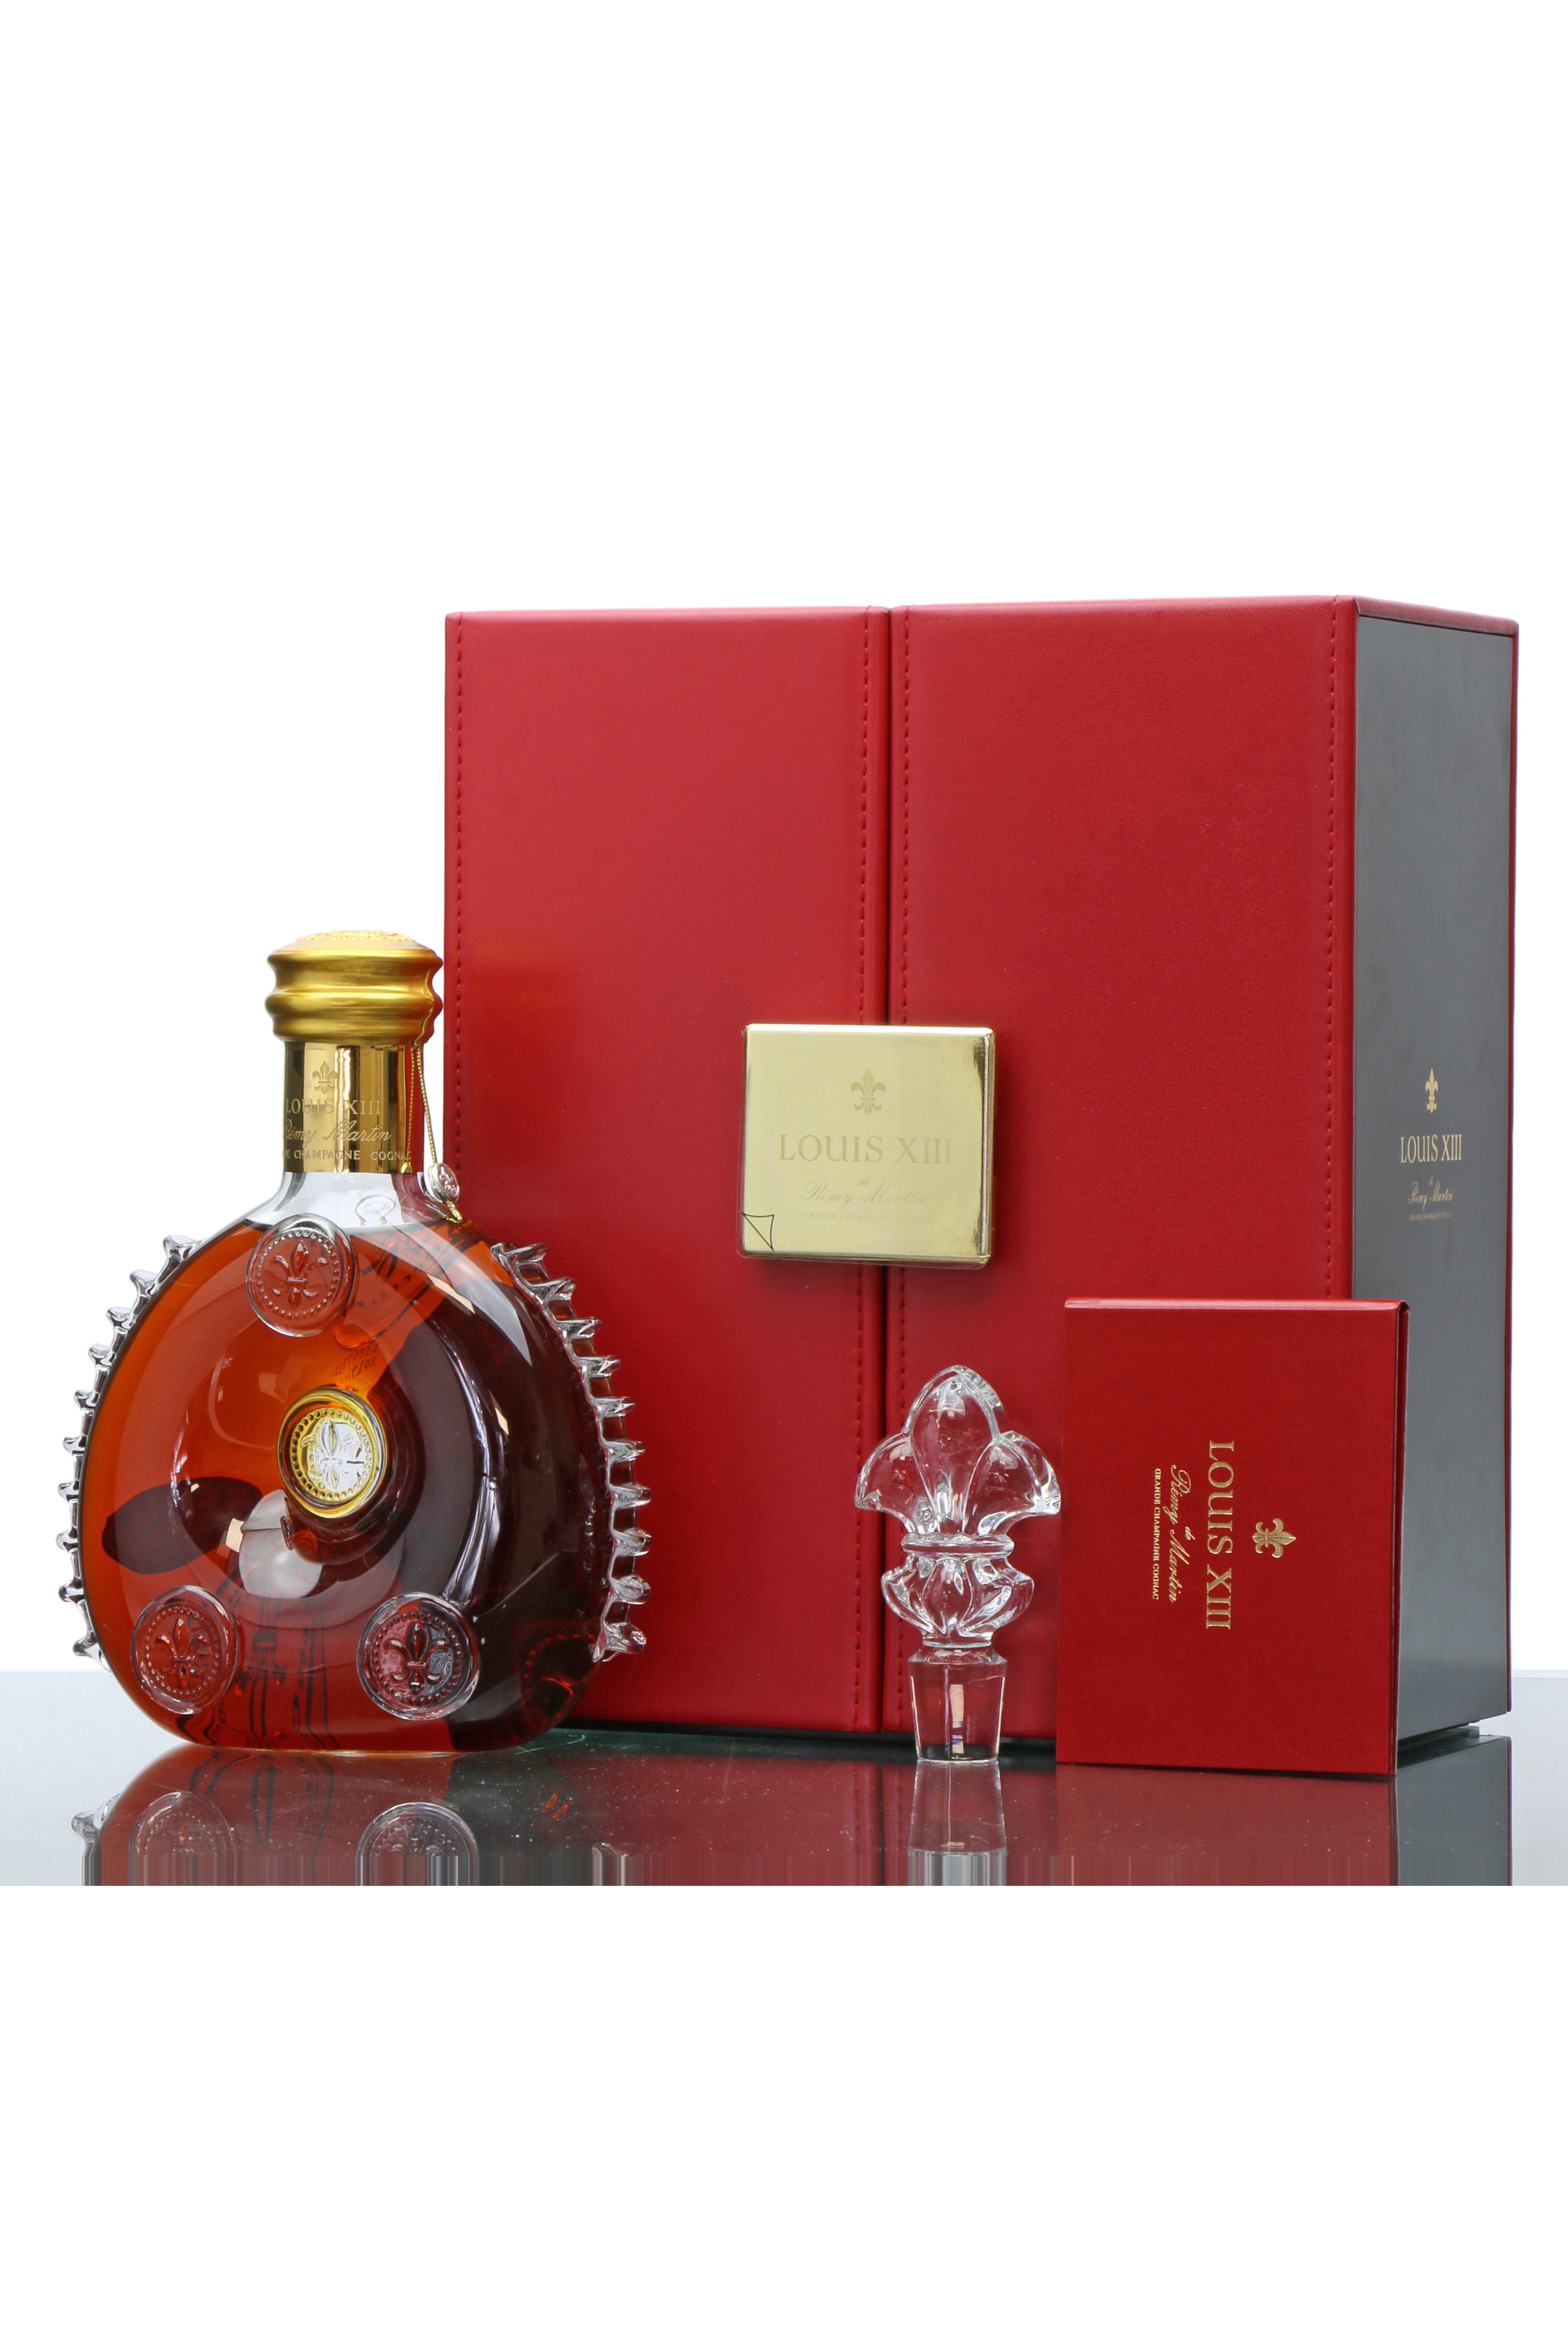 BACCARAT- REMY MARTIN LOUIS XIII GRANDE CHAMPAGNE COGNAC CRYSTAL